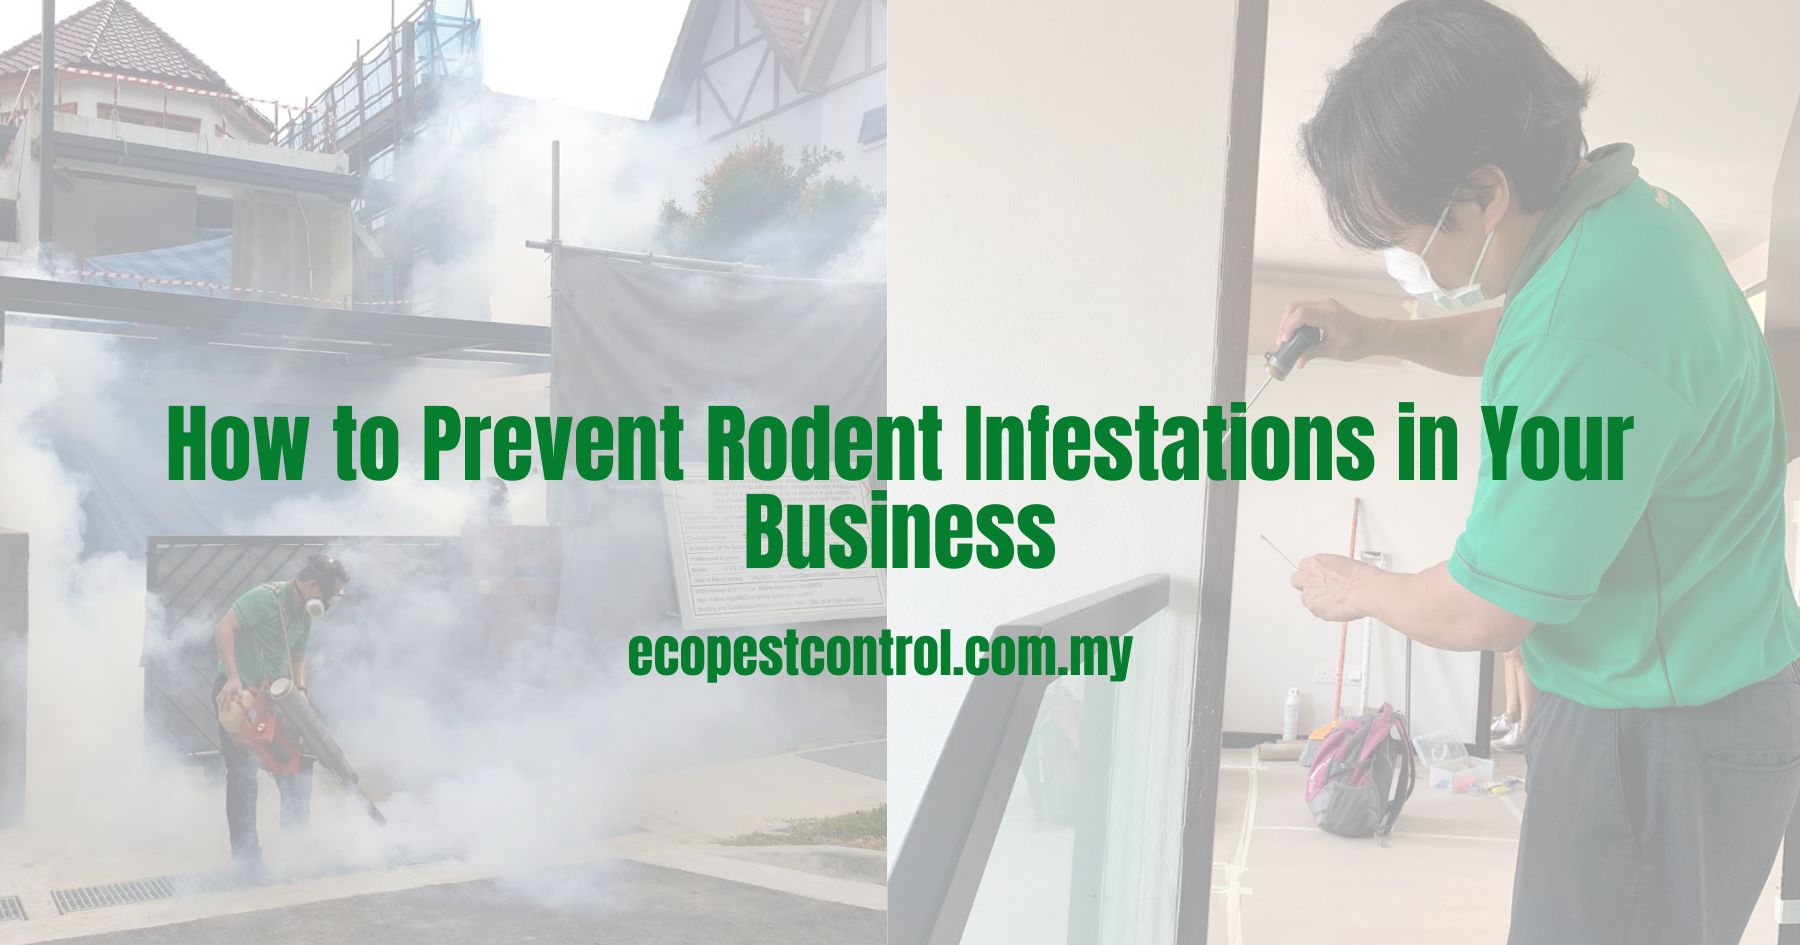 How to Prevent Rodent Infestations in Your Business